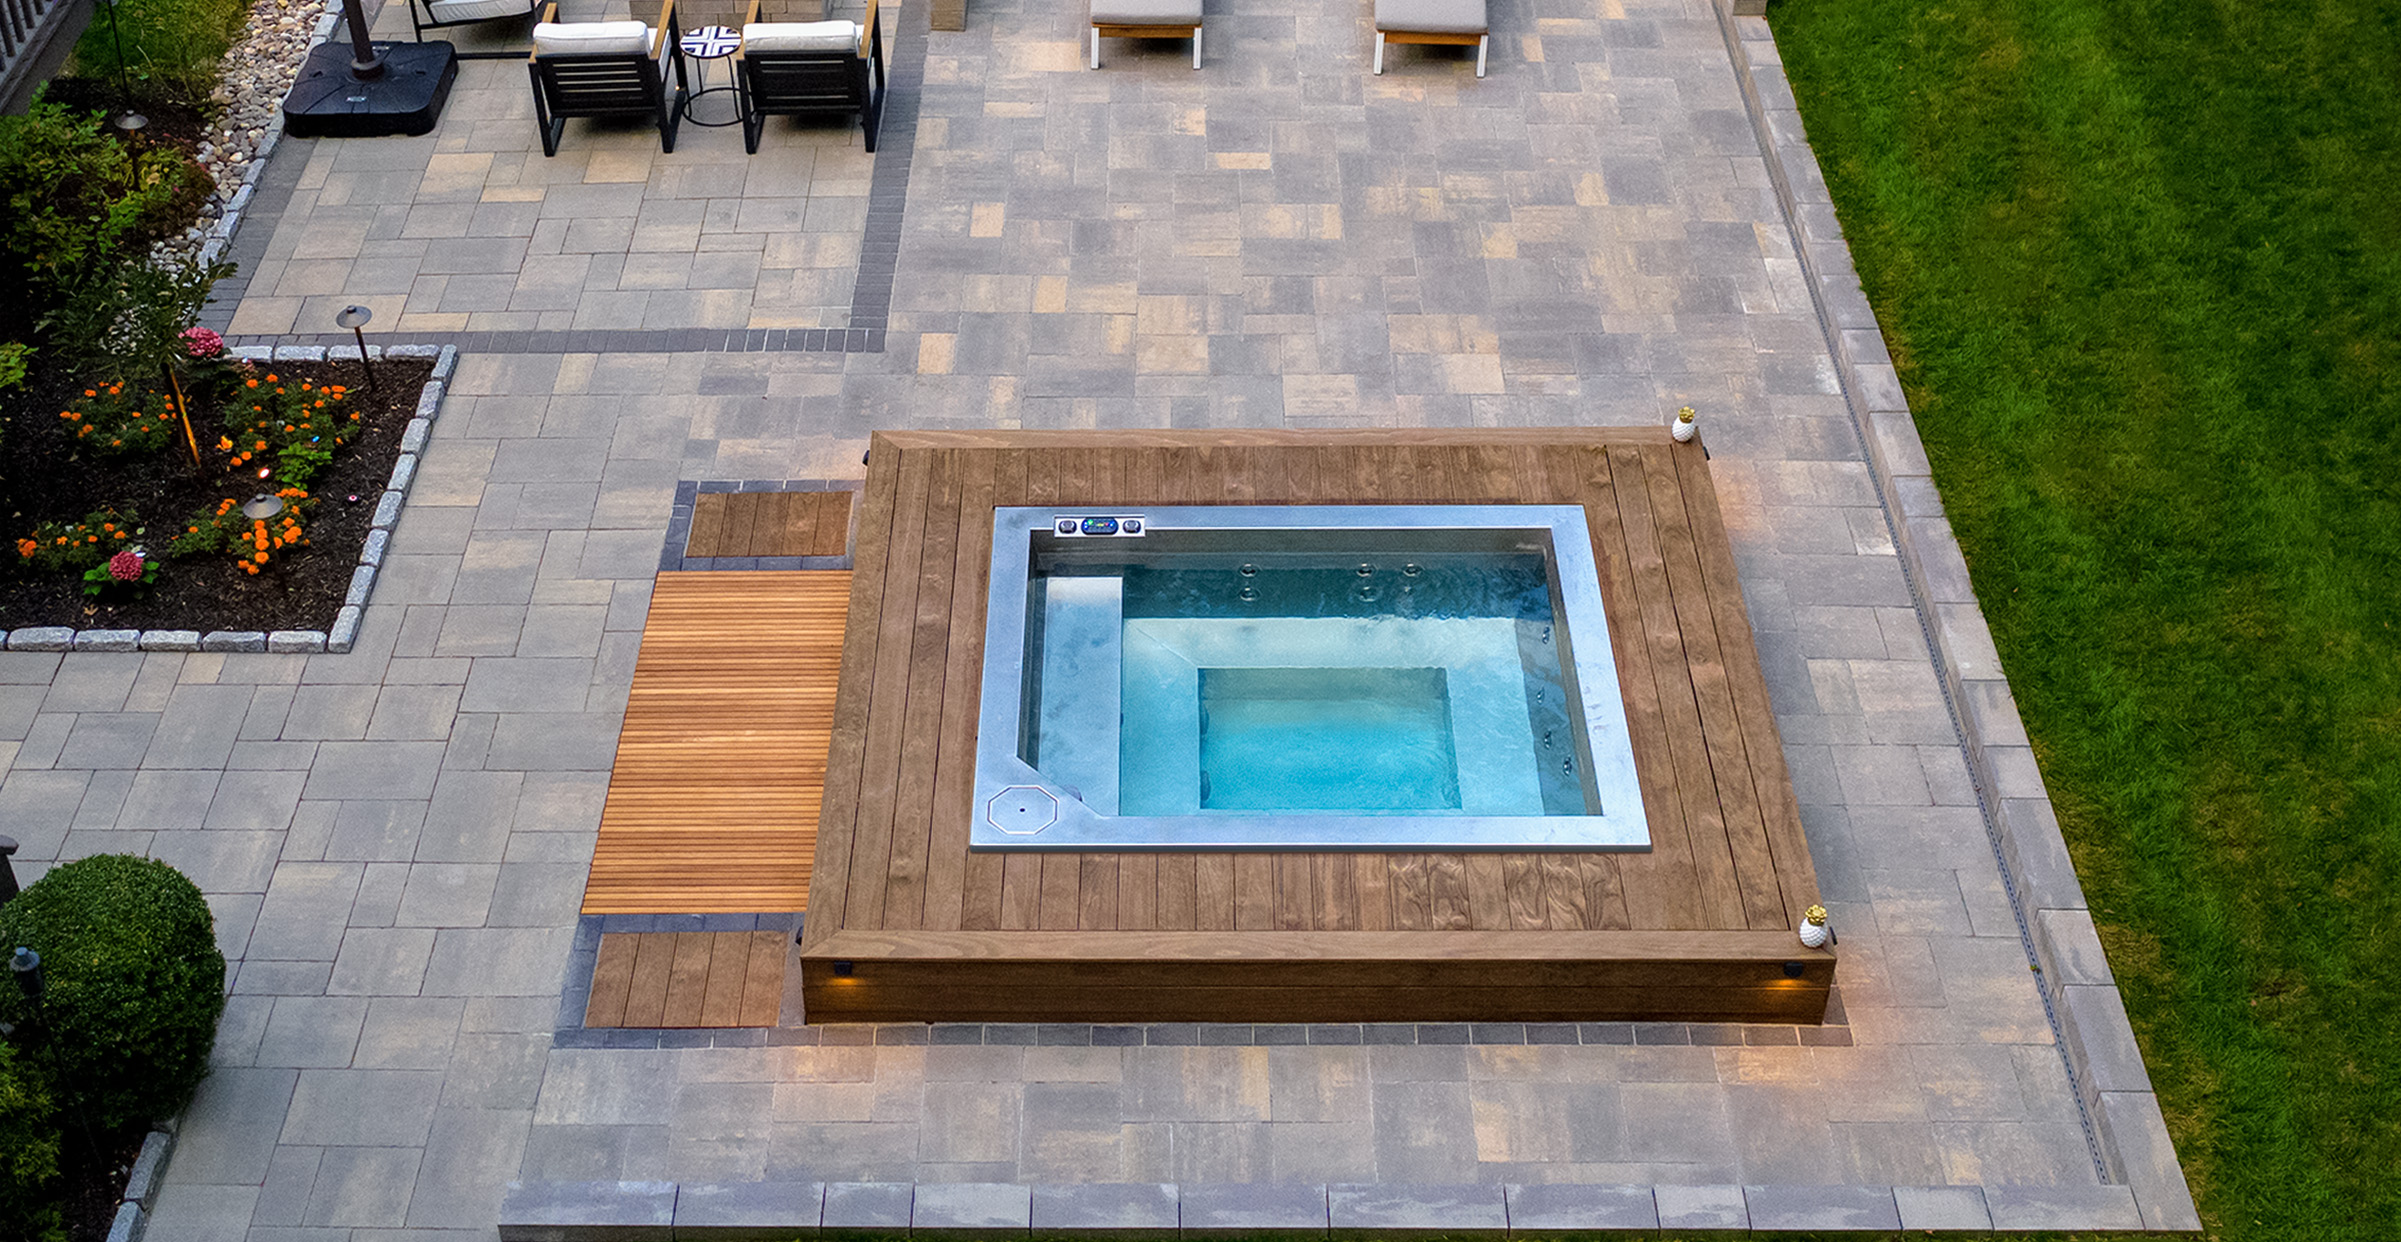 Stainless Steel Spa & Hot Tub - Luxury Hot Tubs